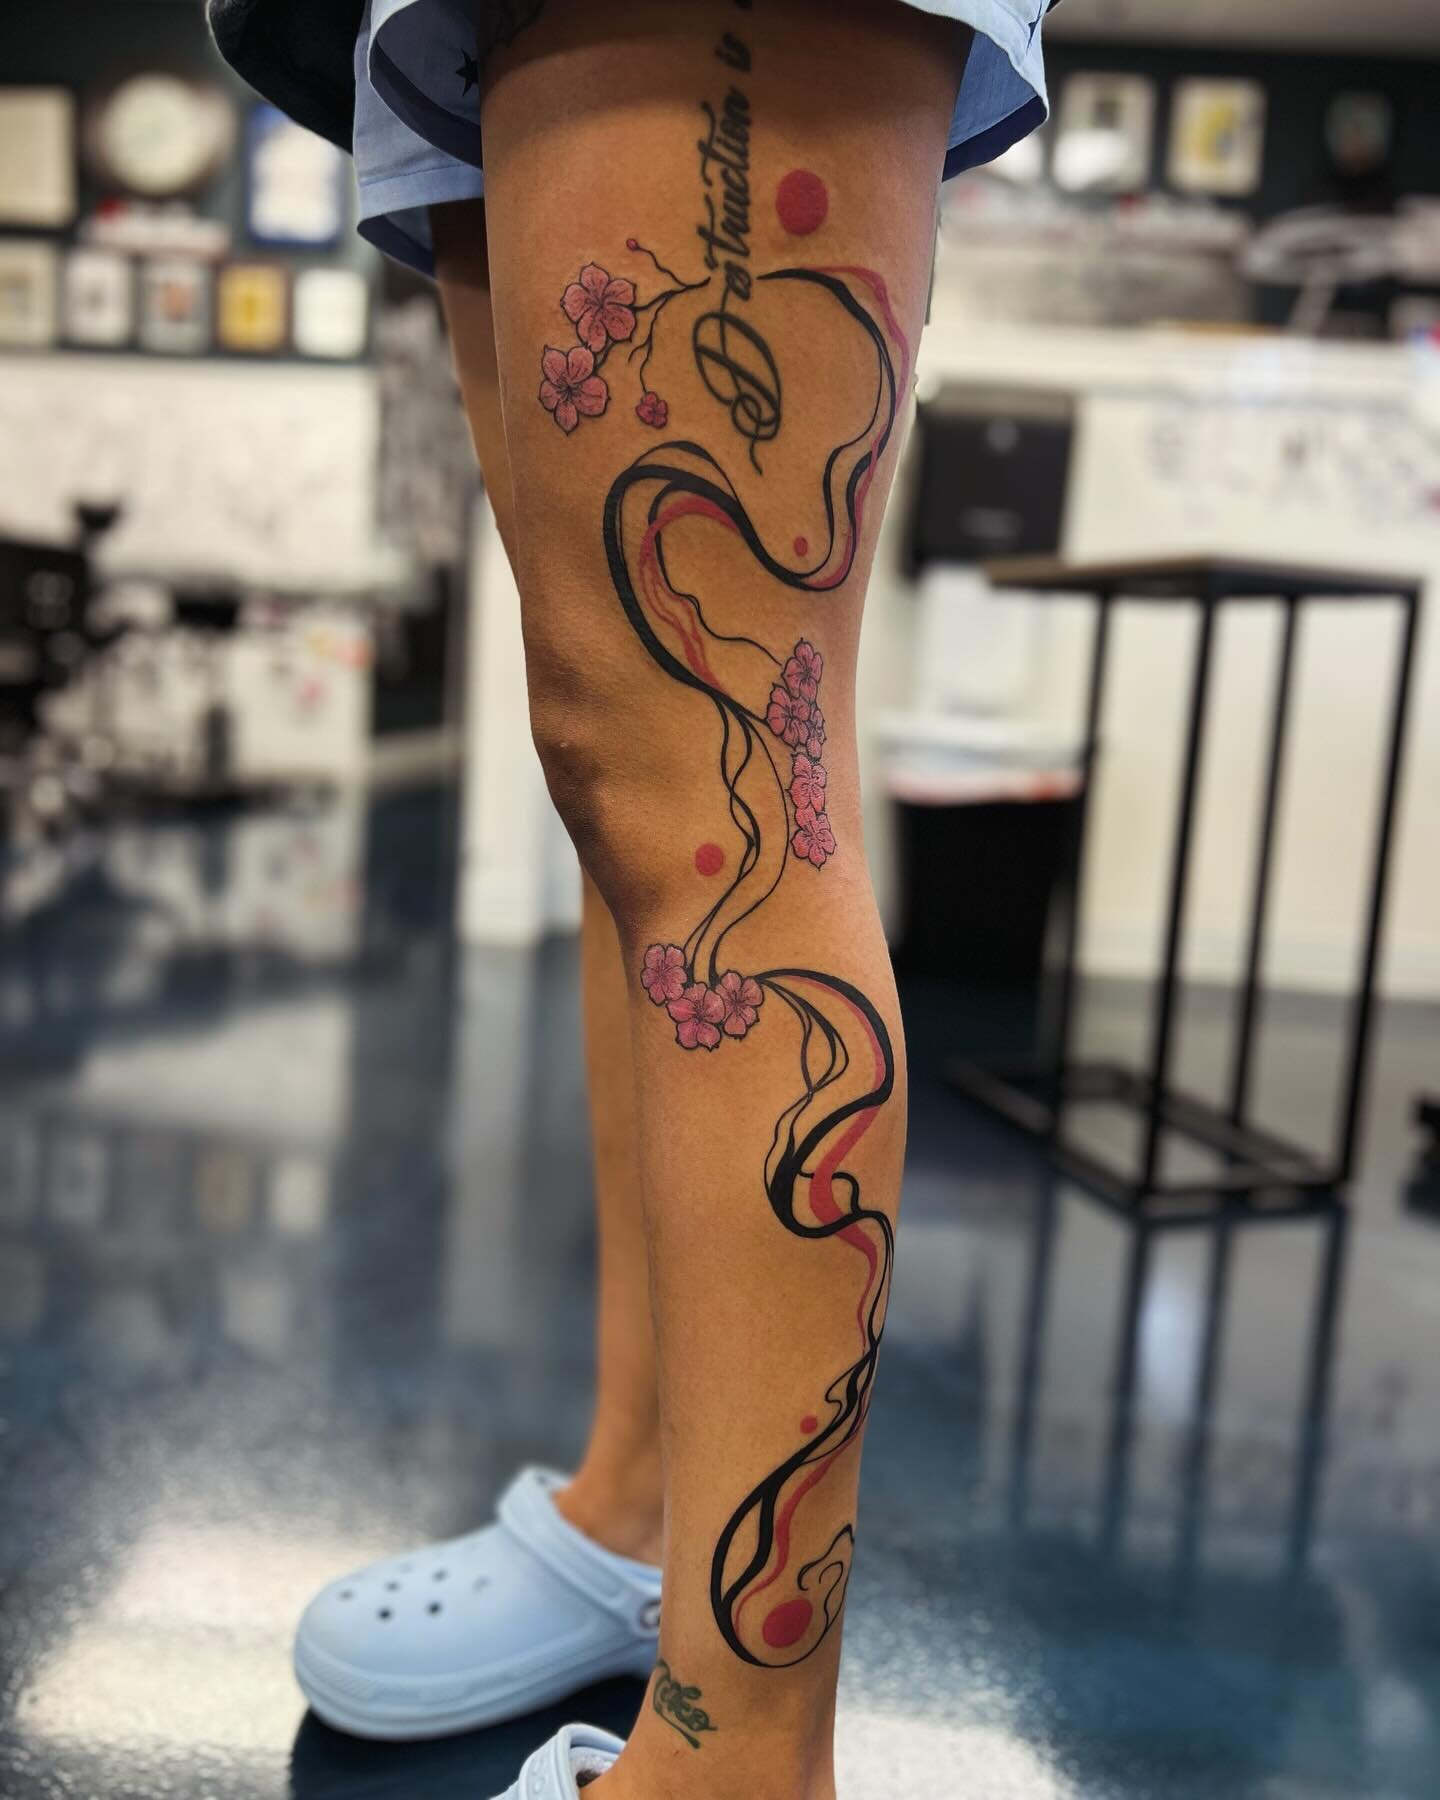 🌸 Freehand Custom Abstract 🌸
DM to book yours or info!
.
Located in Buford, Georgia @inkedarts
100 Hourly | Tuesday - Saturday | 10AM - 6PM
.
.
.
#abtract #inked #abstractart #abstracttattoo #wavylines #abatractartist #georgiatattooartist #buford #